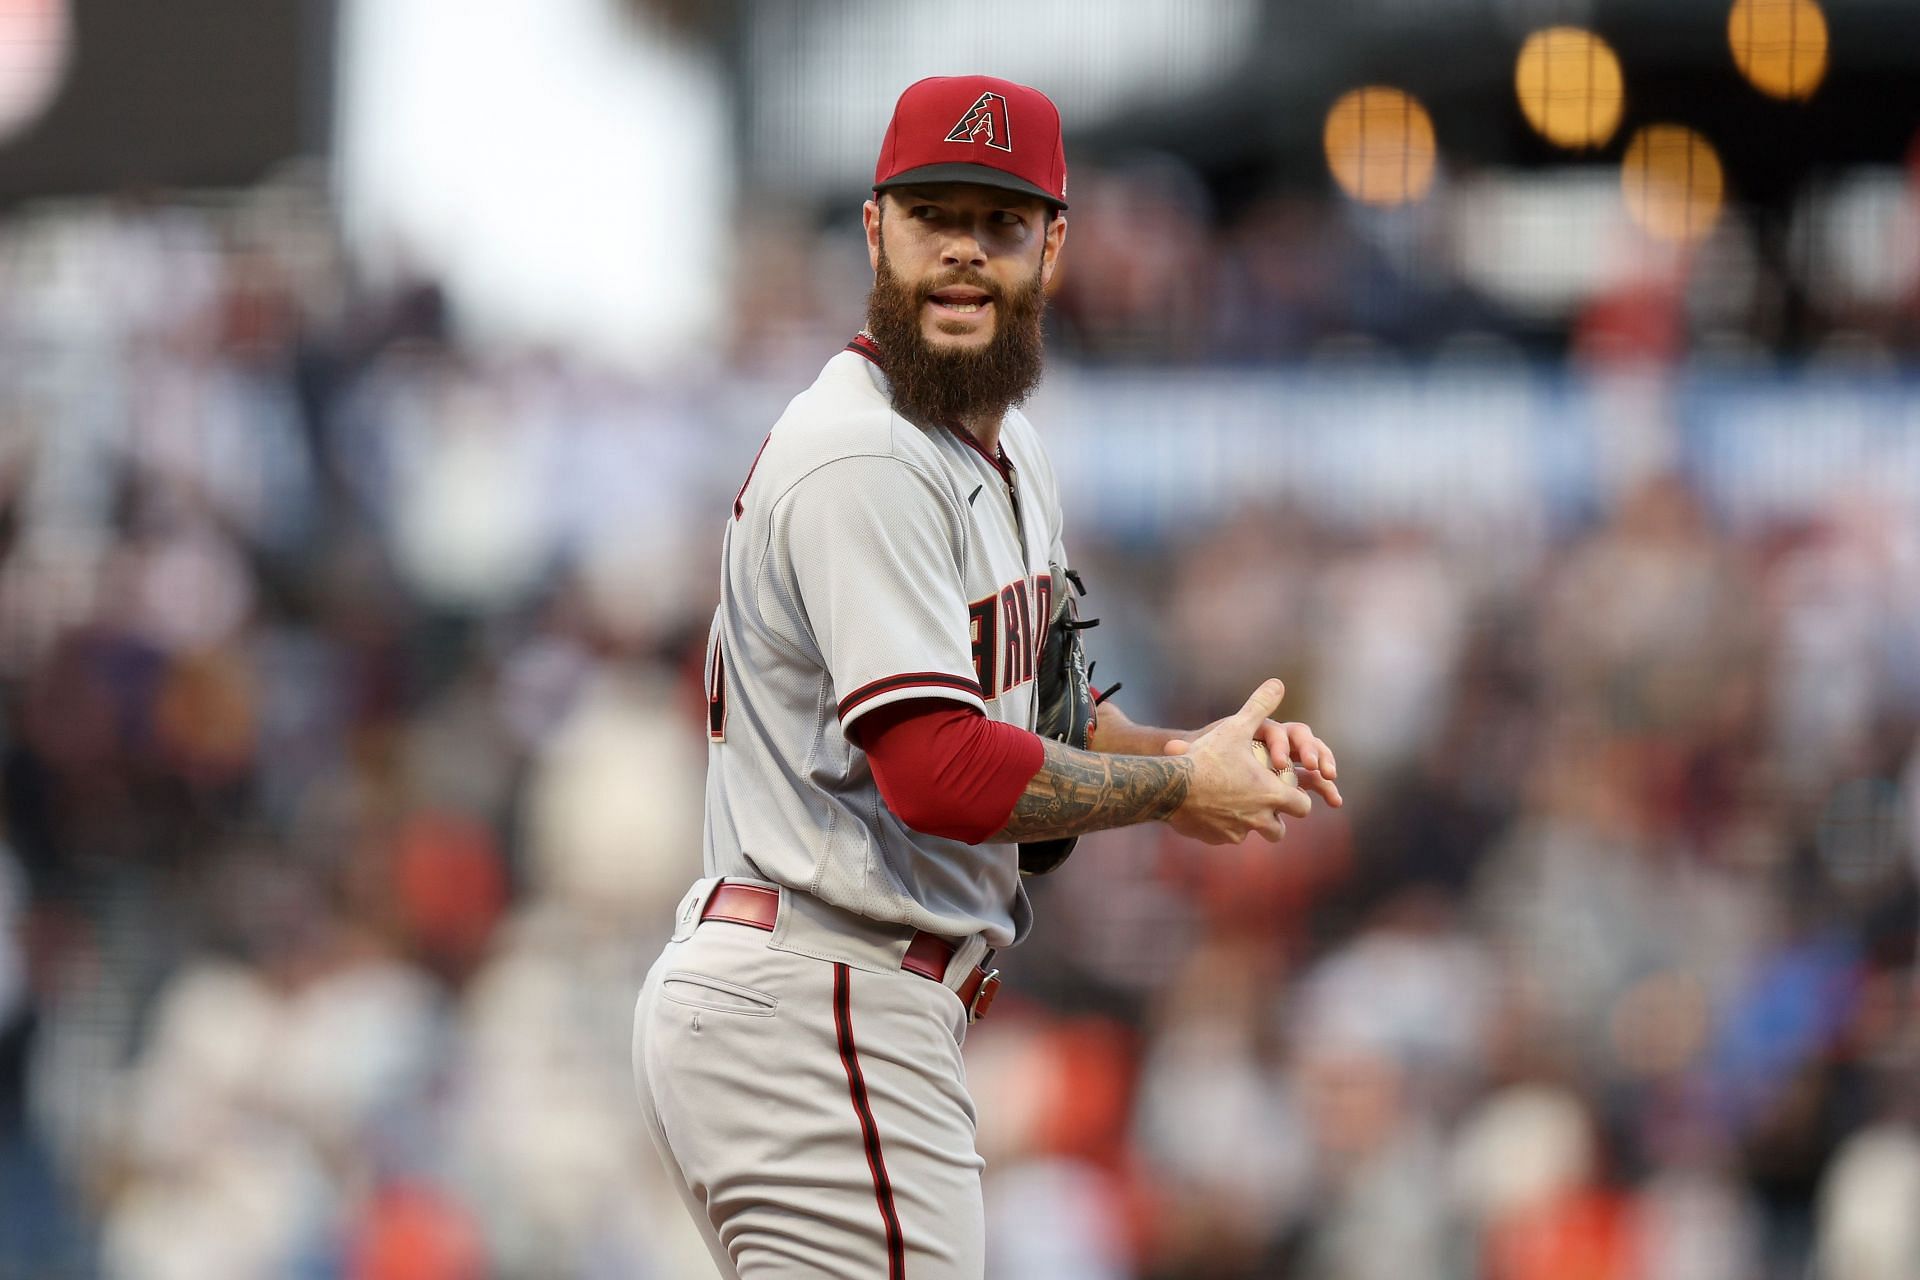 The Texas Rangers have agreed on a minor league deal with two-time All-Star Dallas Keuchel